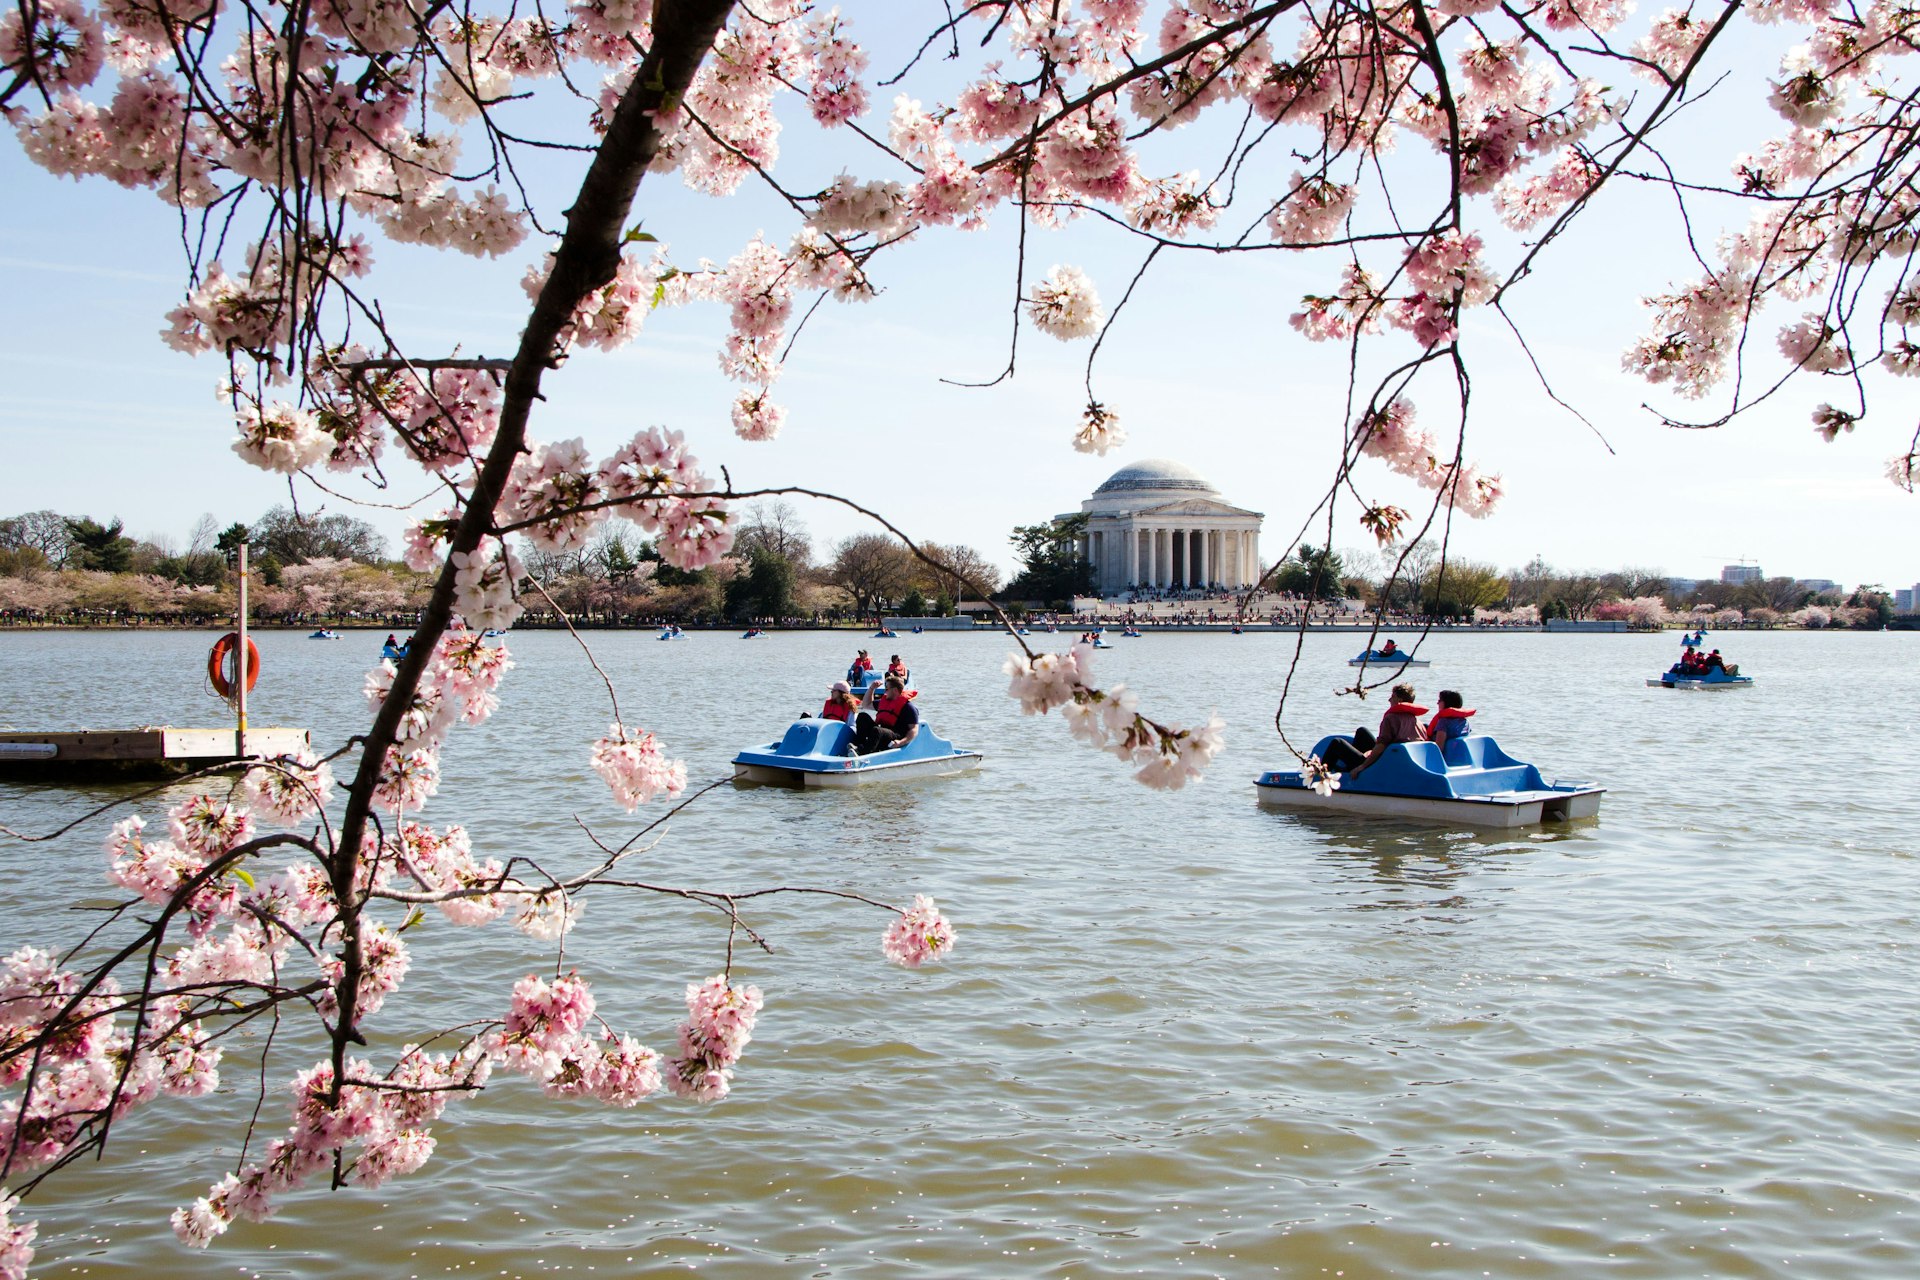 Tree branches covered in cherry blossoms are.in the foreground, while people ride paddle boats on the Tidal Basin in Washington, DC beyond